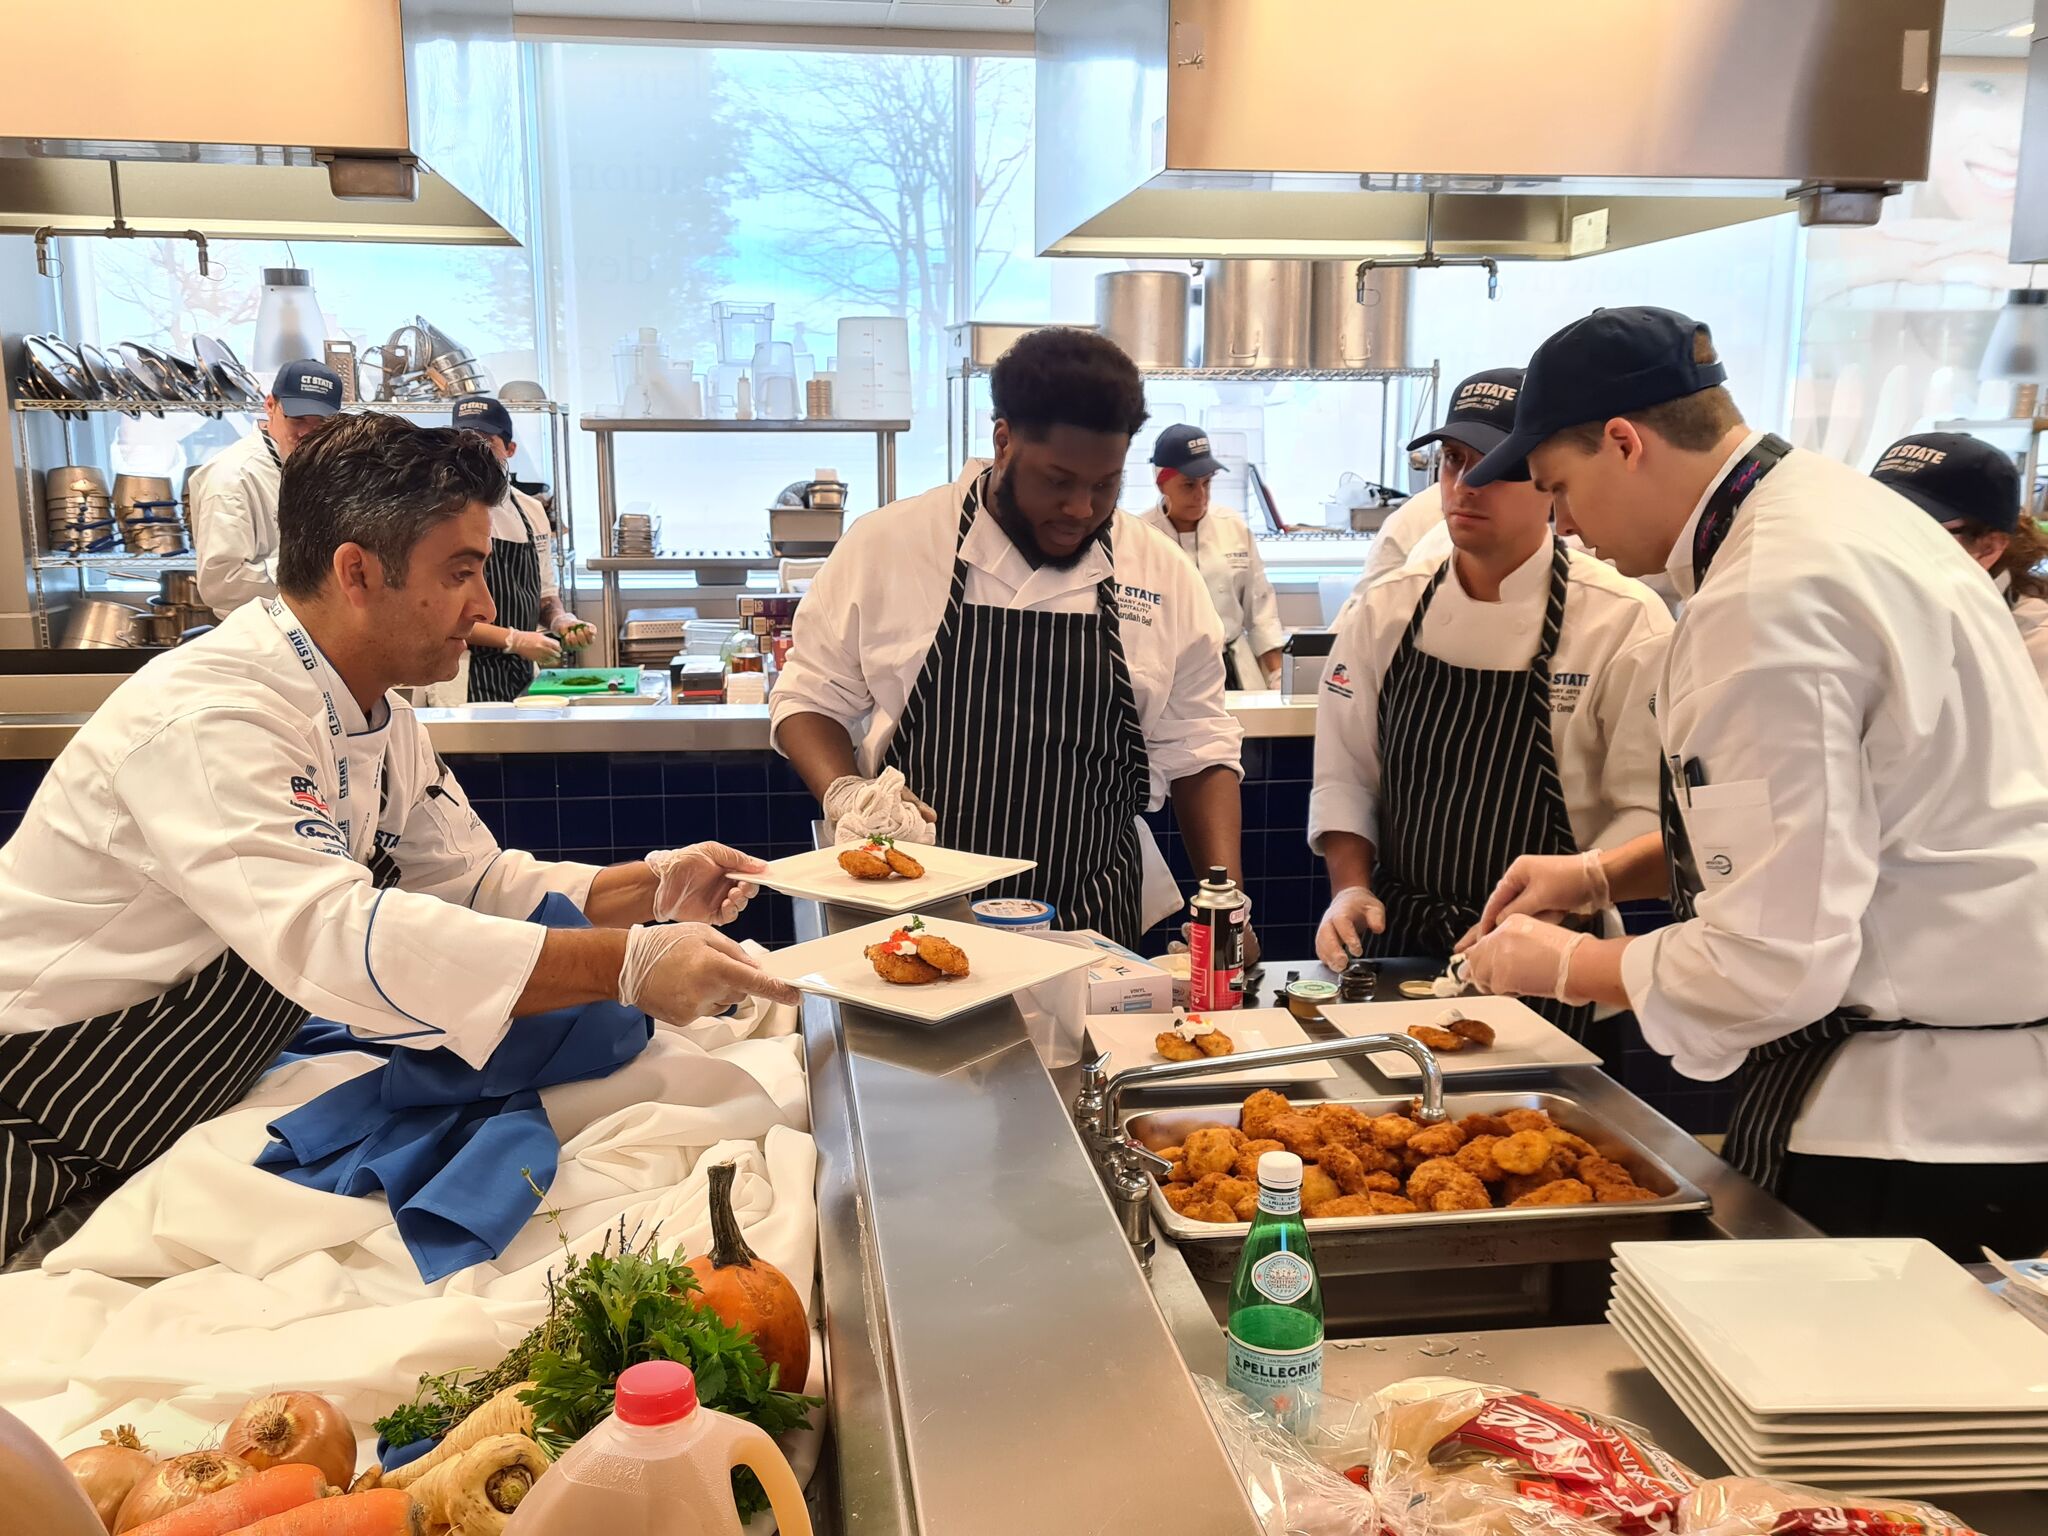 CT culinary students compete in cooking contest